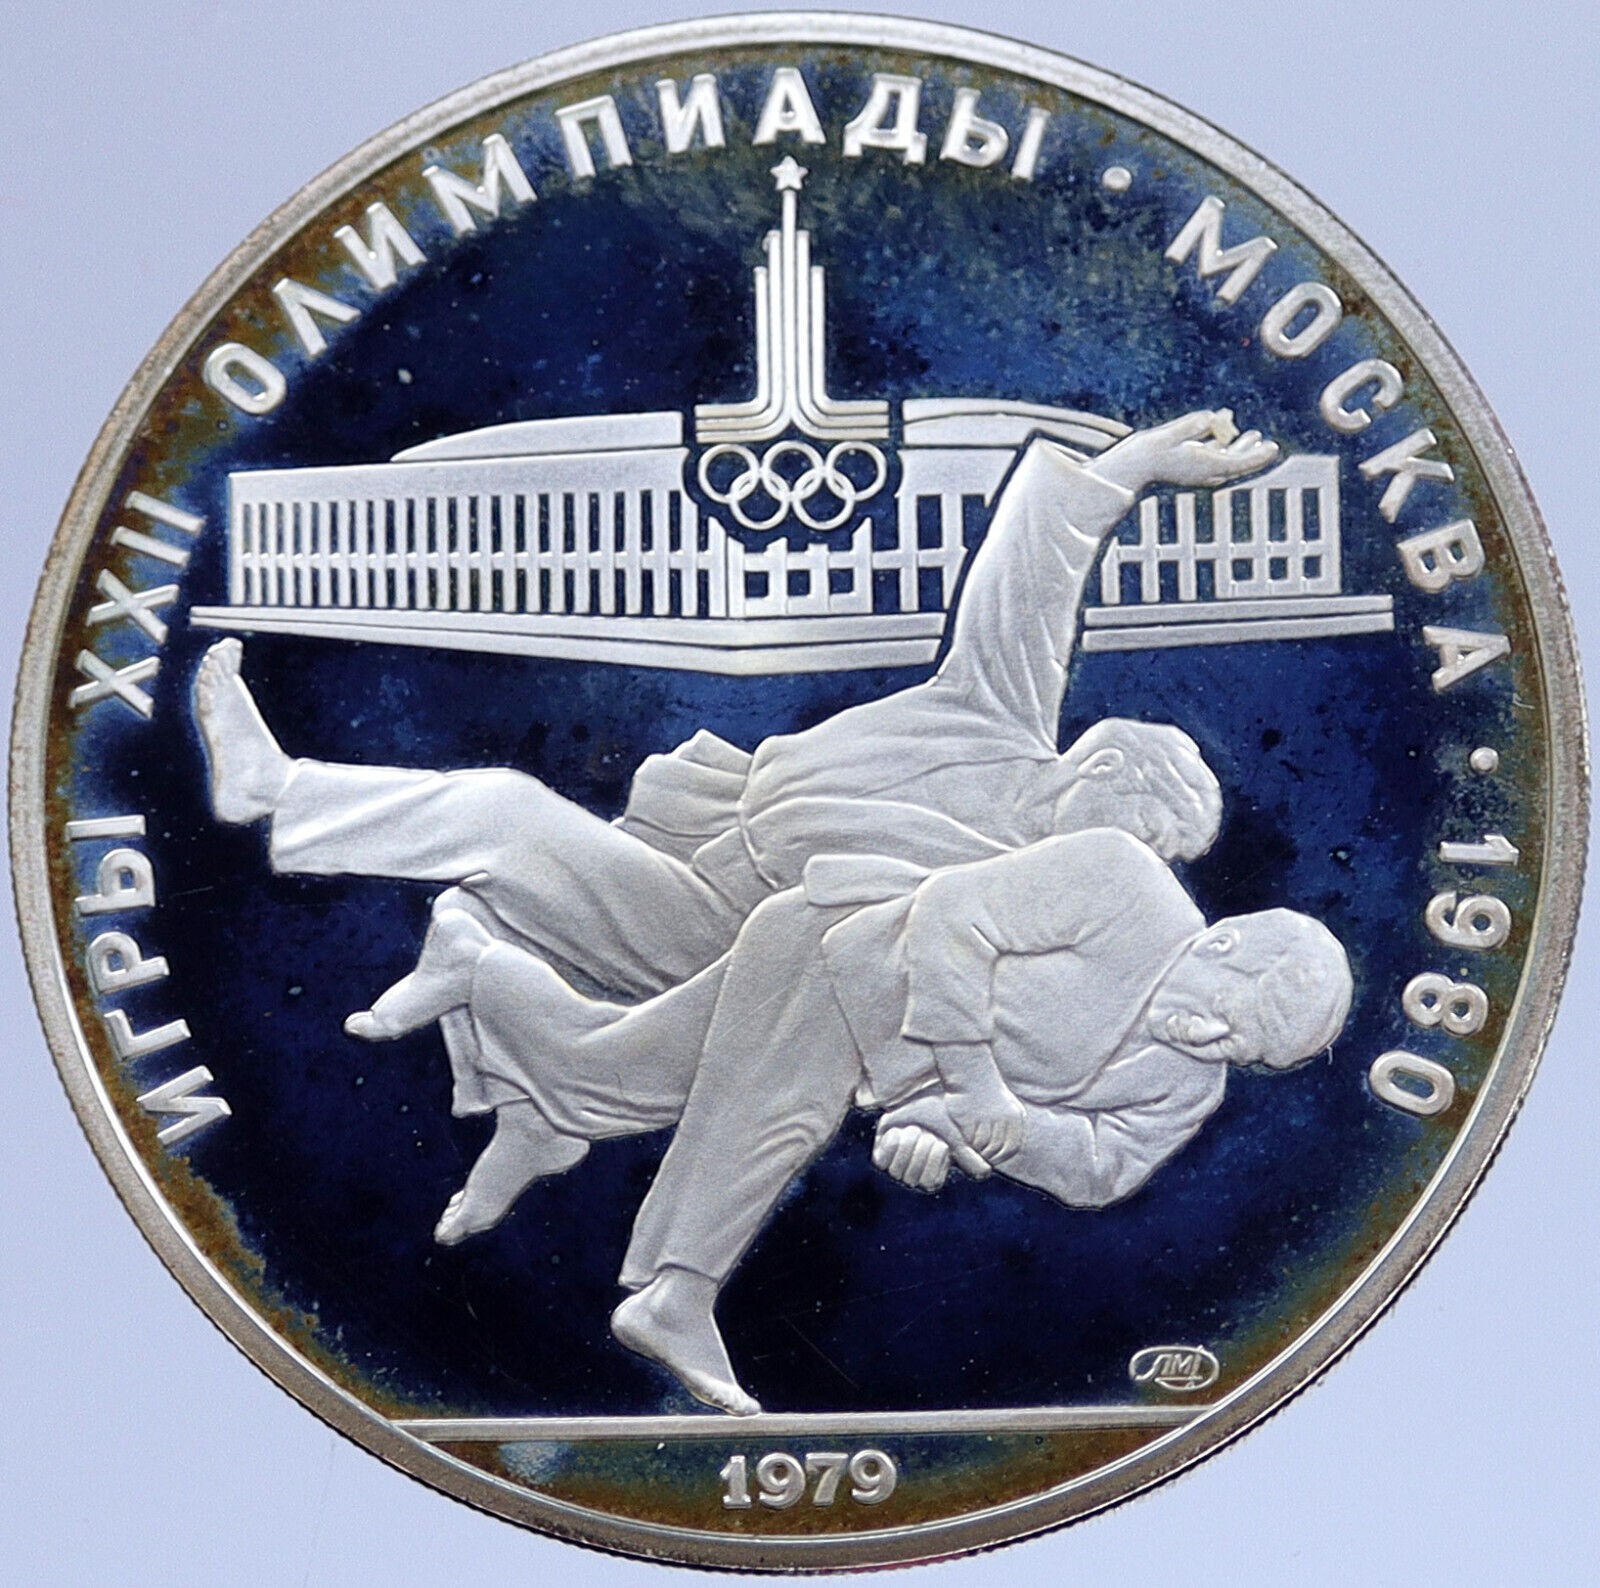 1979 Russia MOSCOW 1980 Summer Olympics JUDO Proof Silver 10 Ruble Coin i118952